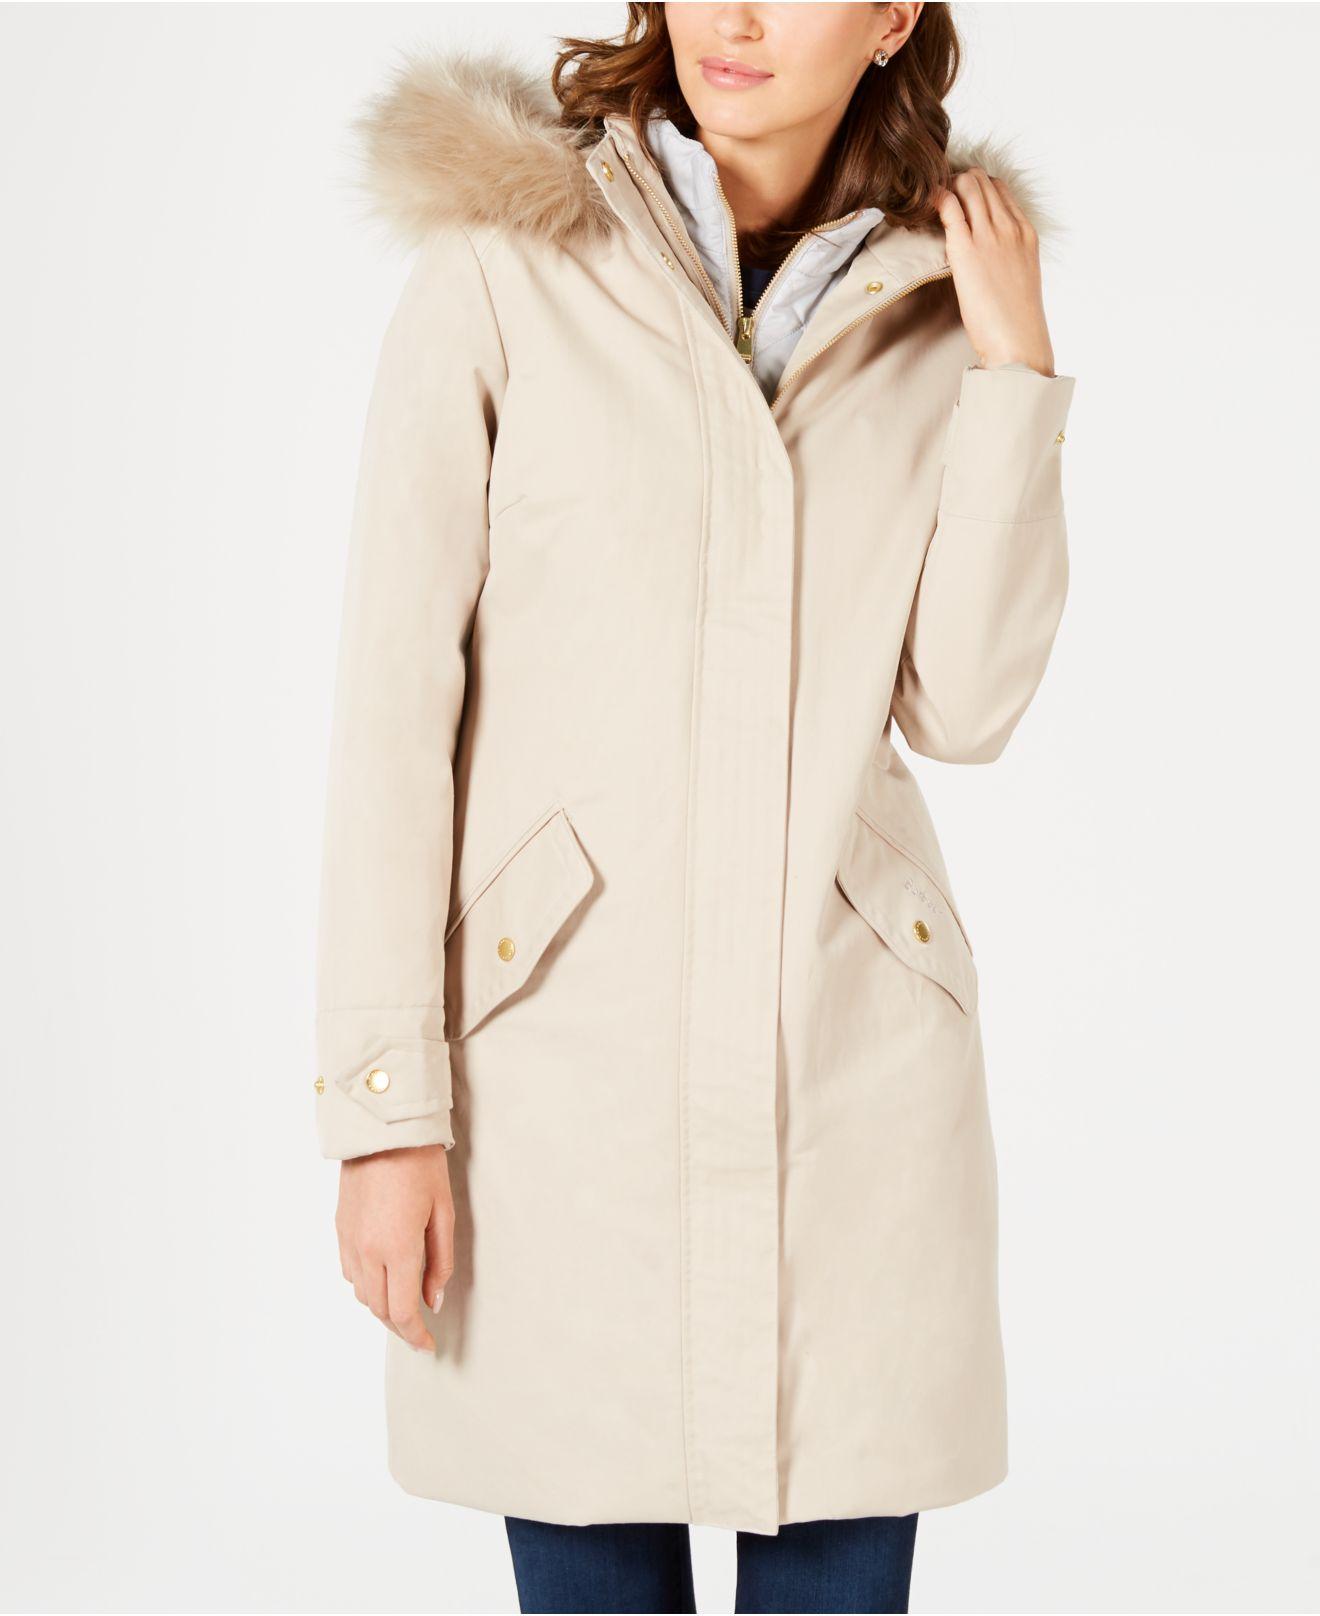 Barbour Bute Faux-fur Hooded Puffer Coat in Beige (Natural) - Lyst